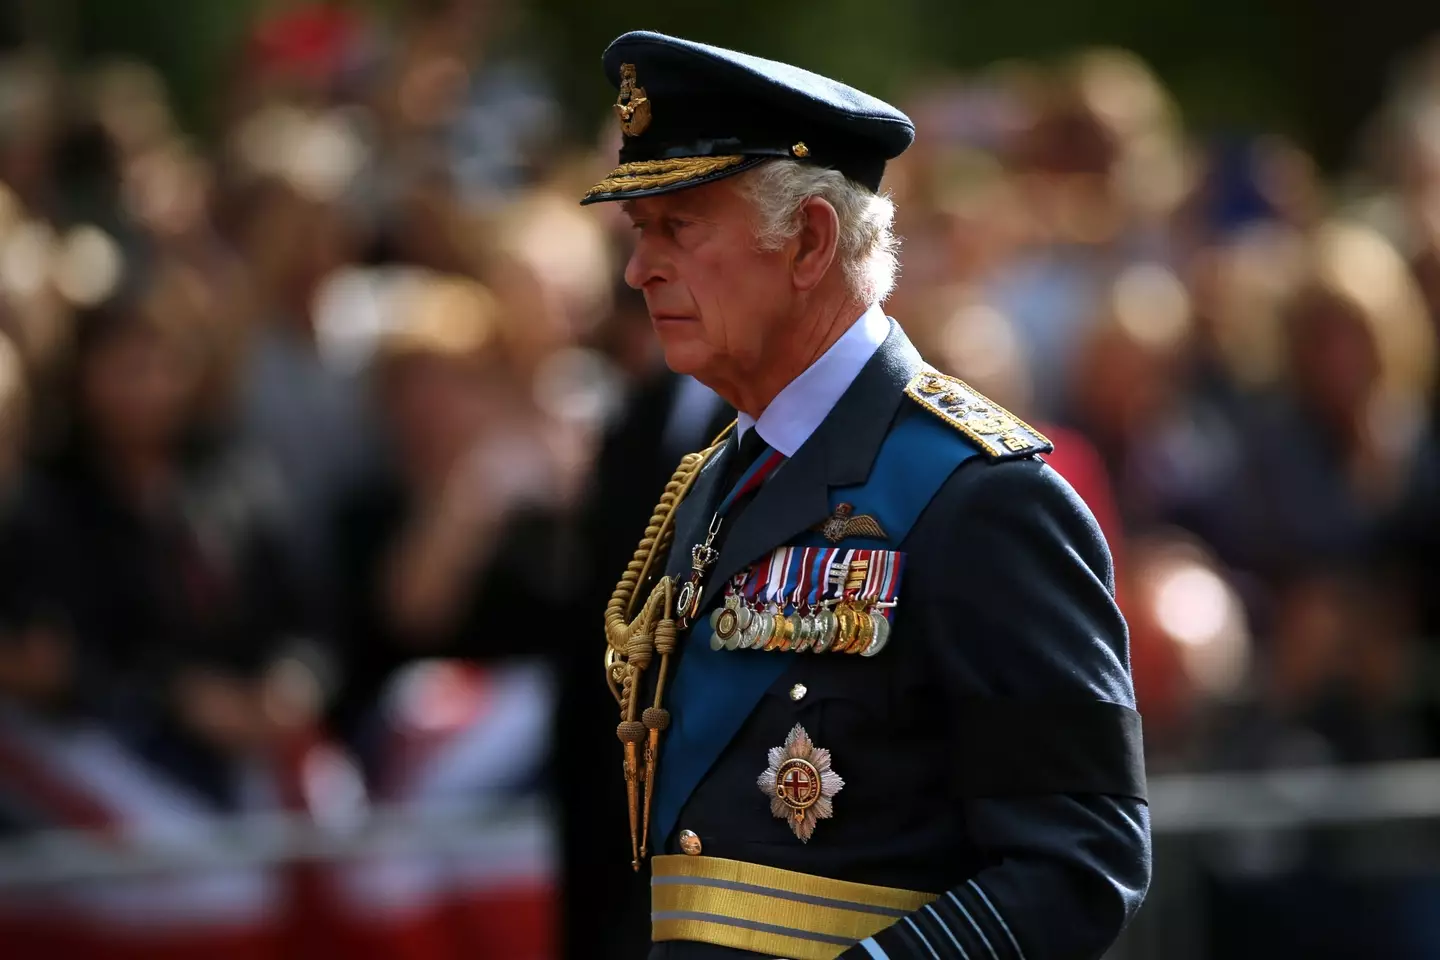 King Charles III has reportedly received a letter from Meghan Markle.